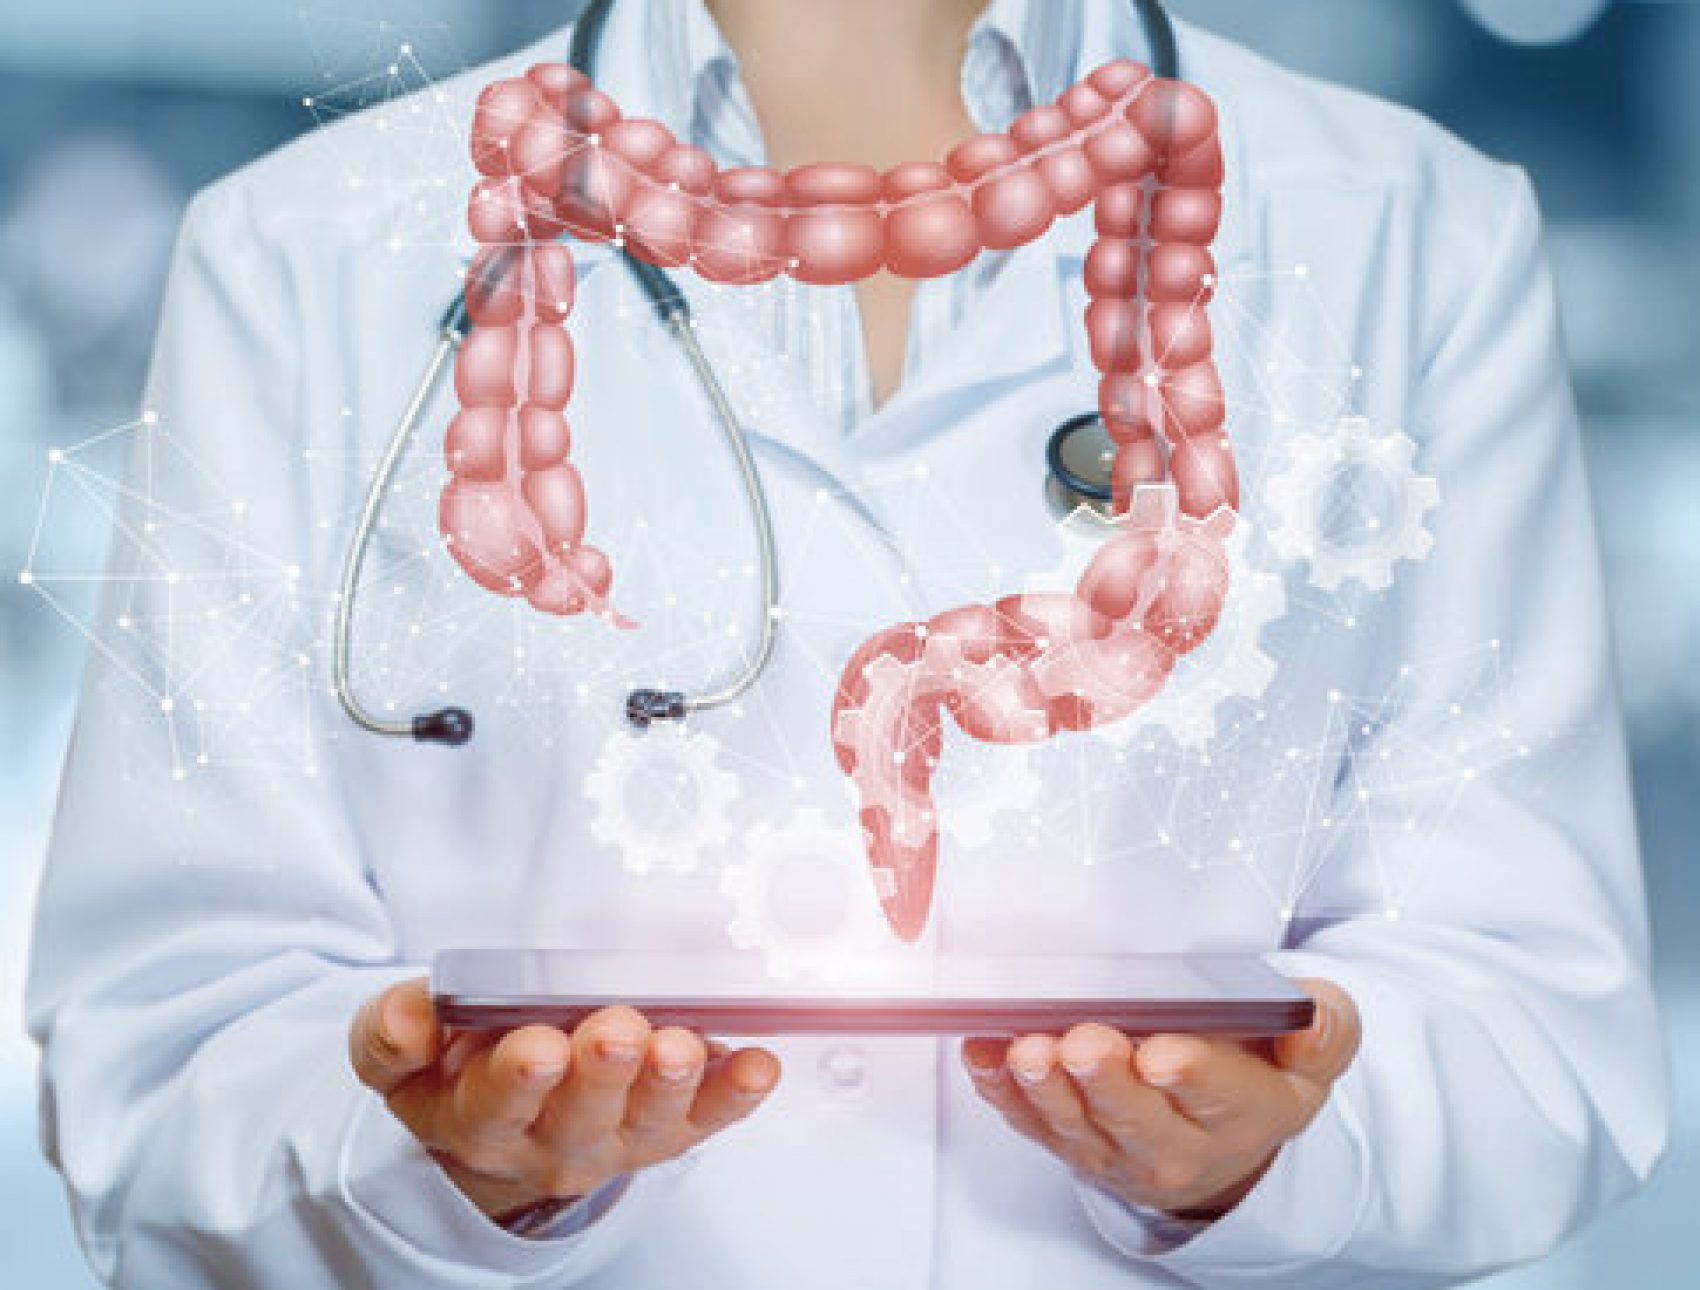 An intestines model is hanging above a device in doctor's hands at a hospital background. The concept is the professional internal organs treatment.